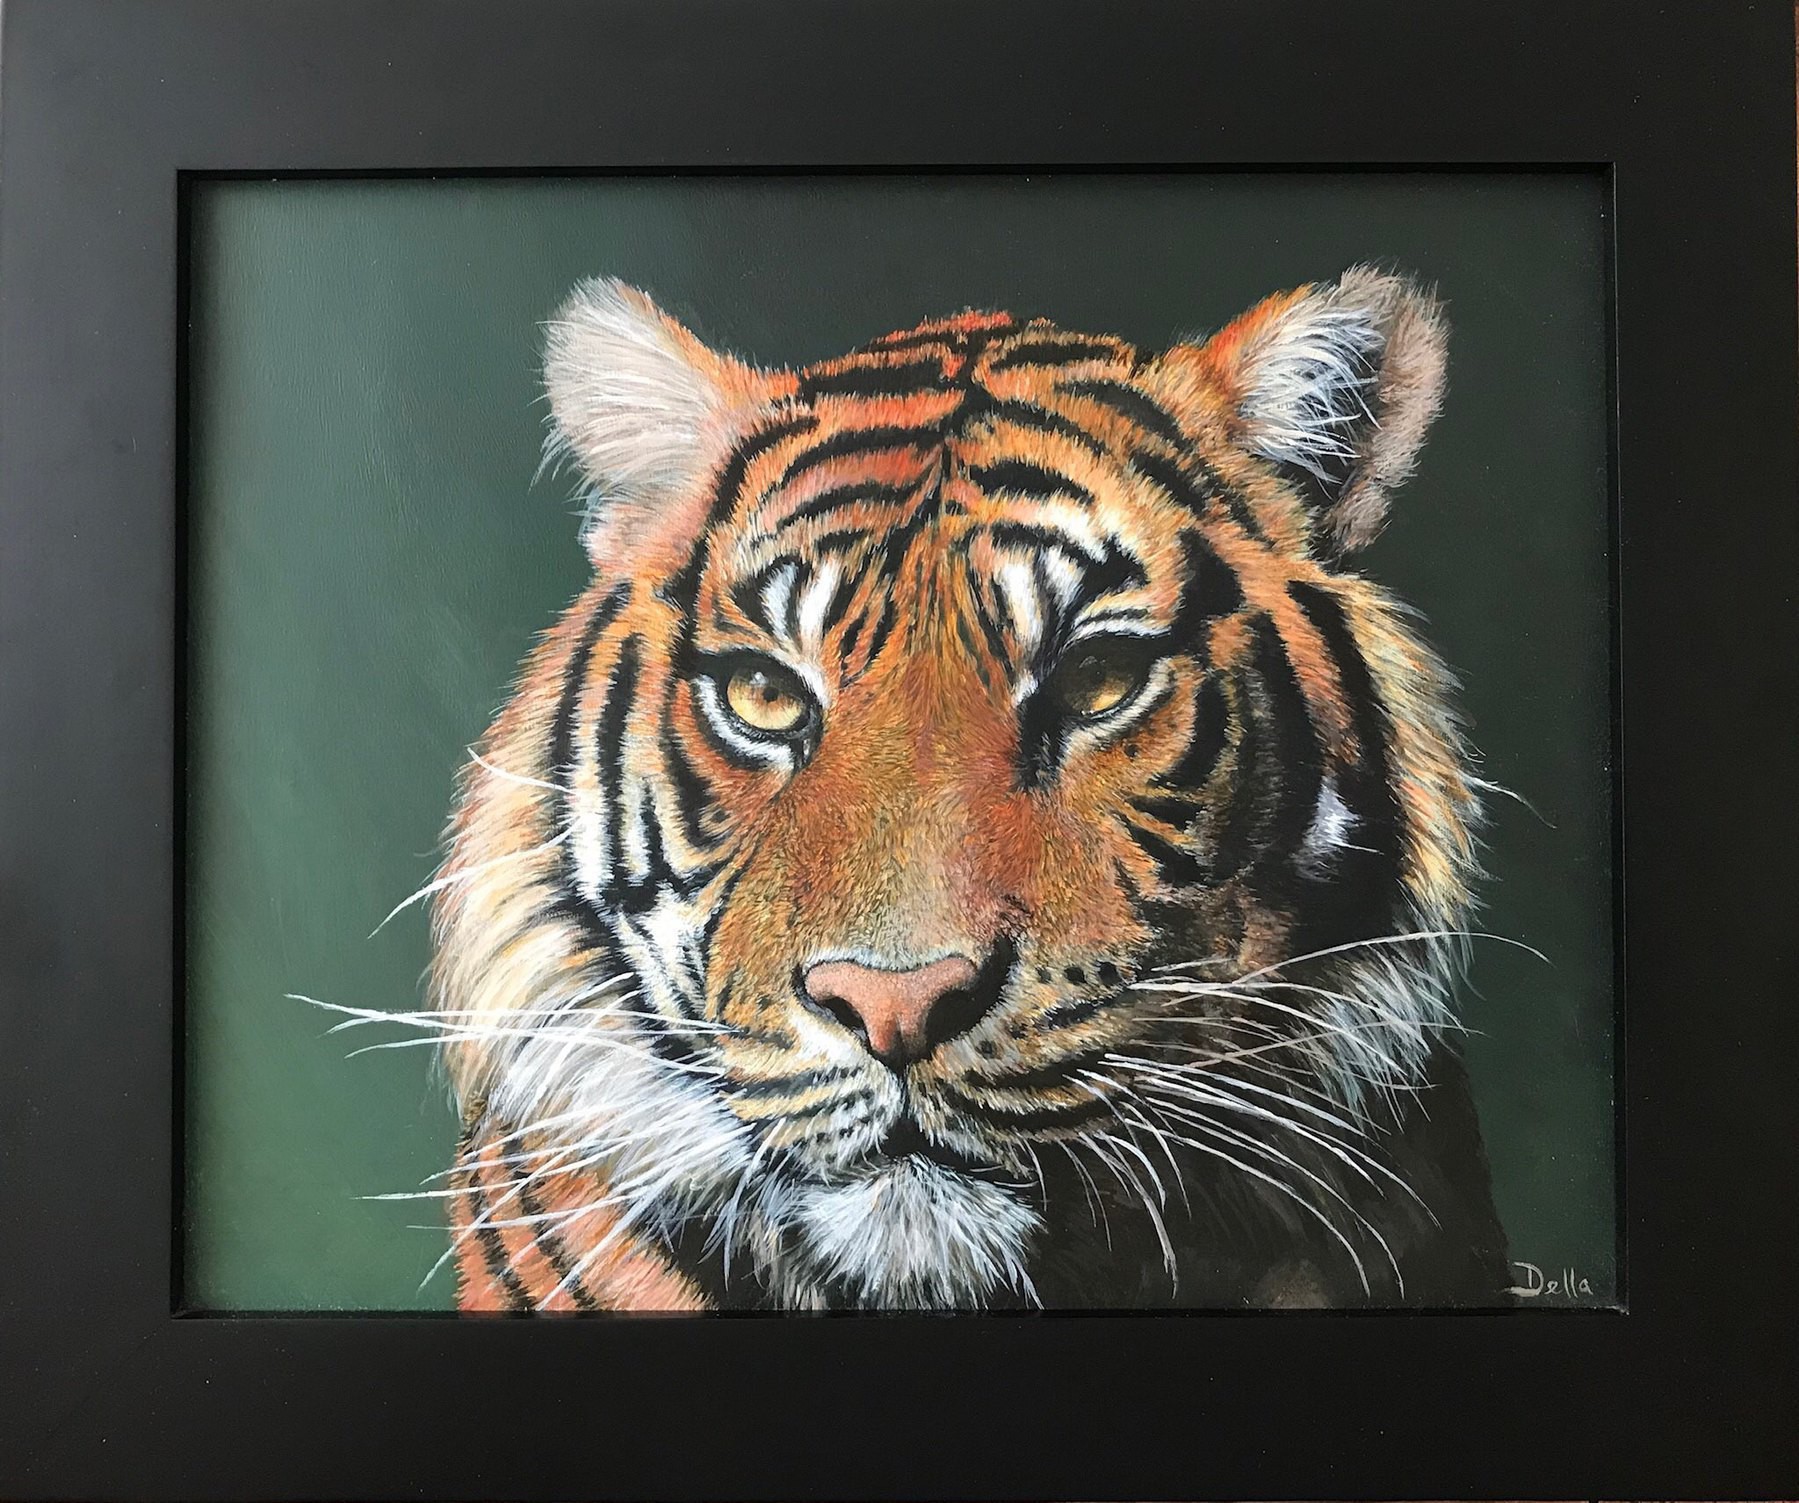 Acrylic painting of a tiger by Della Chelpka